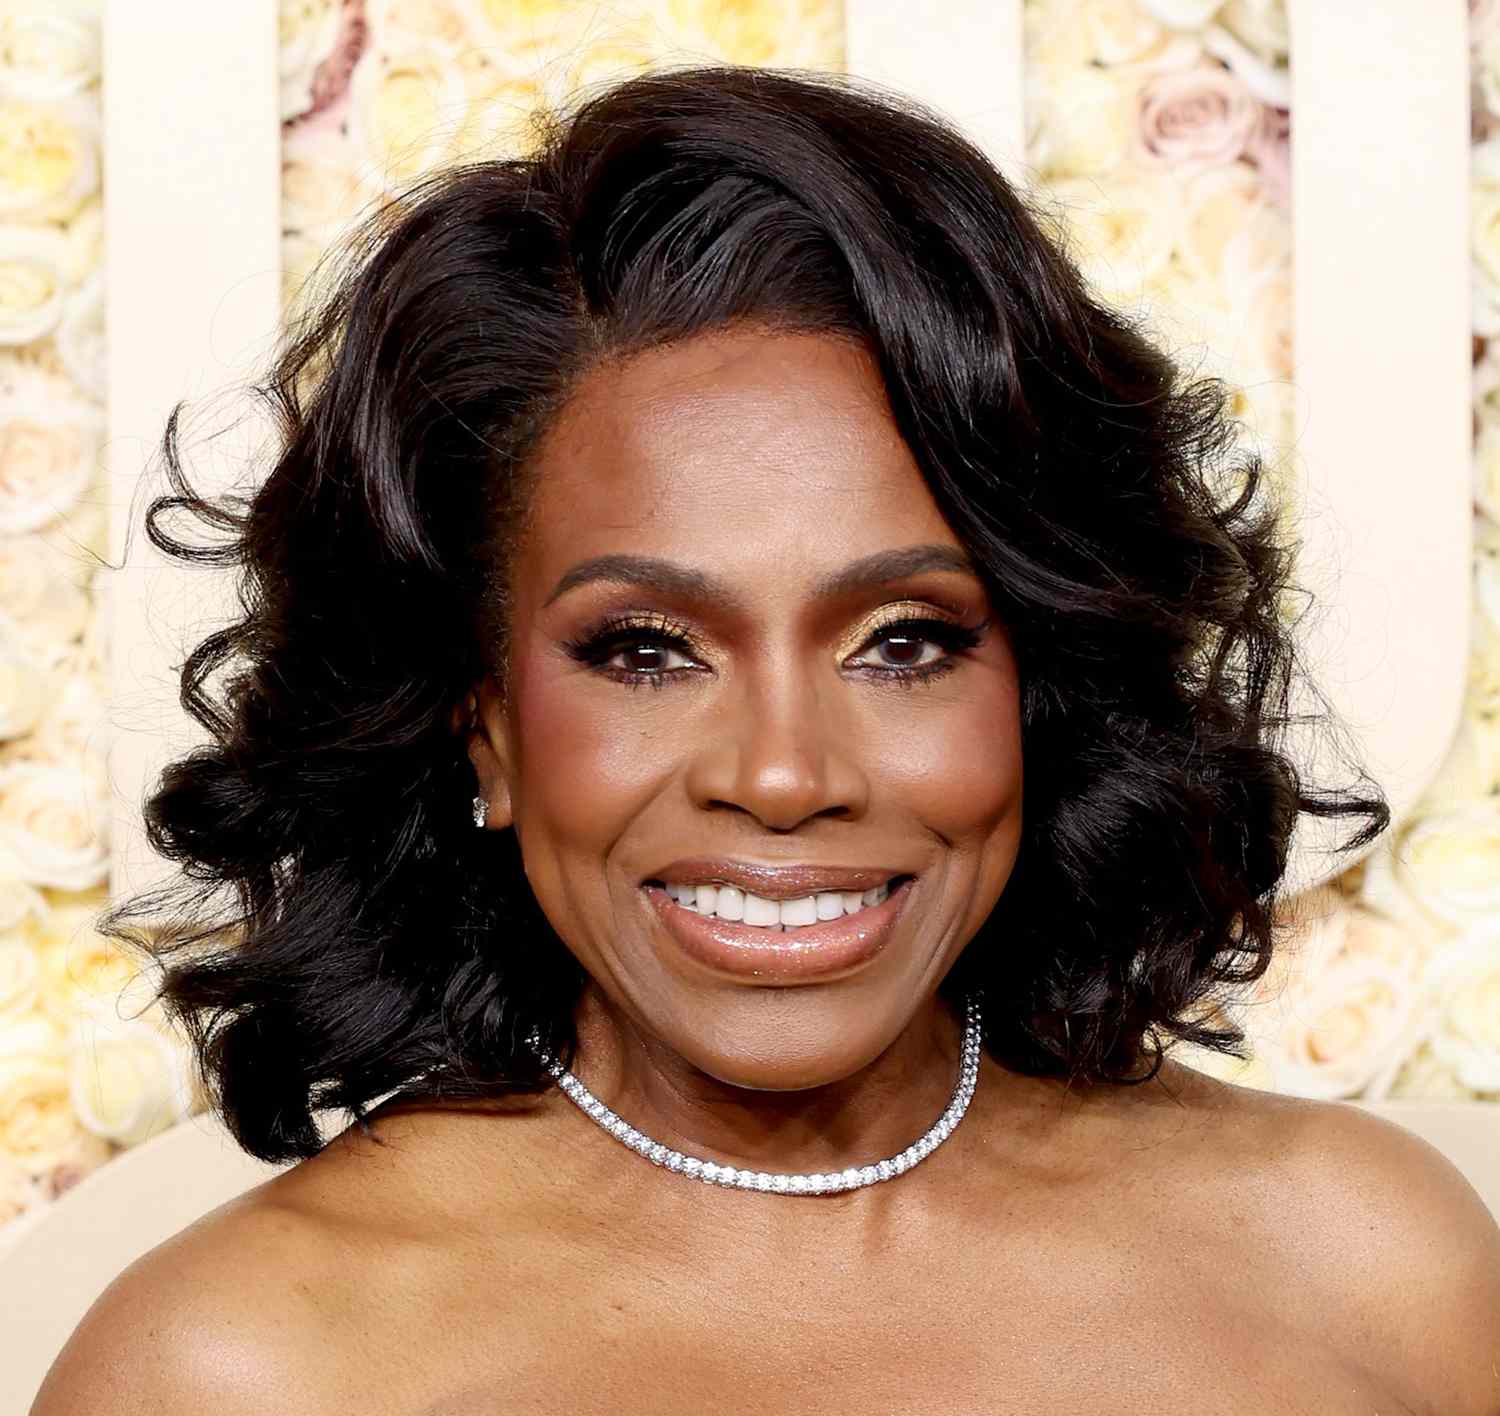 Sheryl Lee Ralph with a voluminous curled bob hairstyle and radiant makeup look